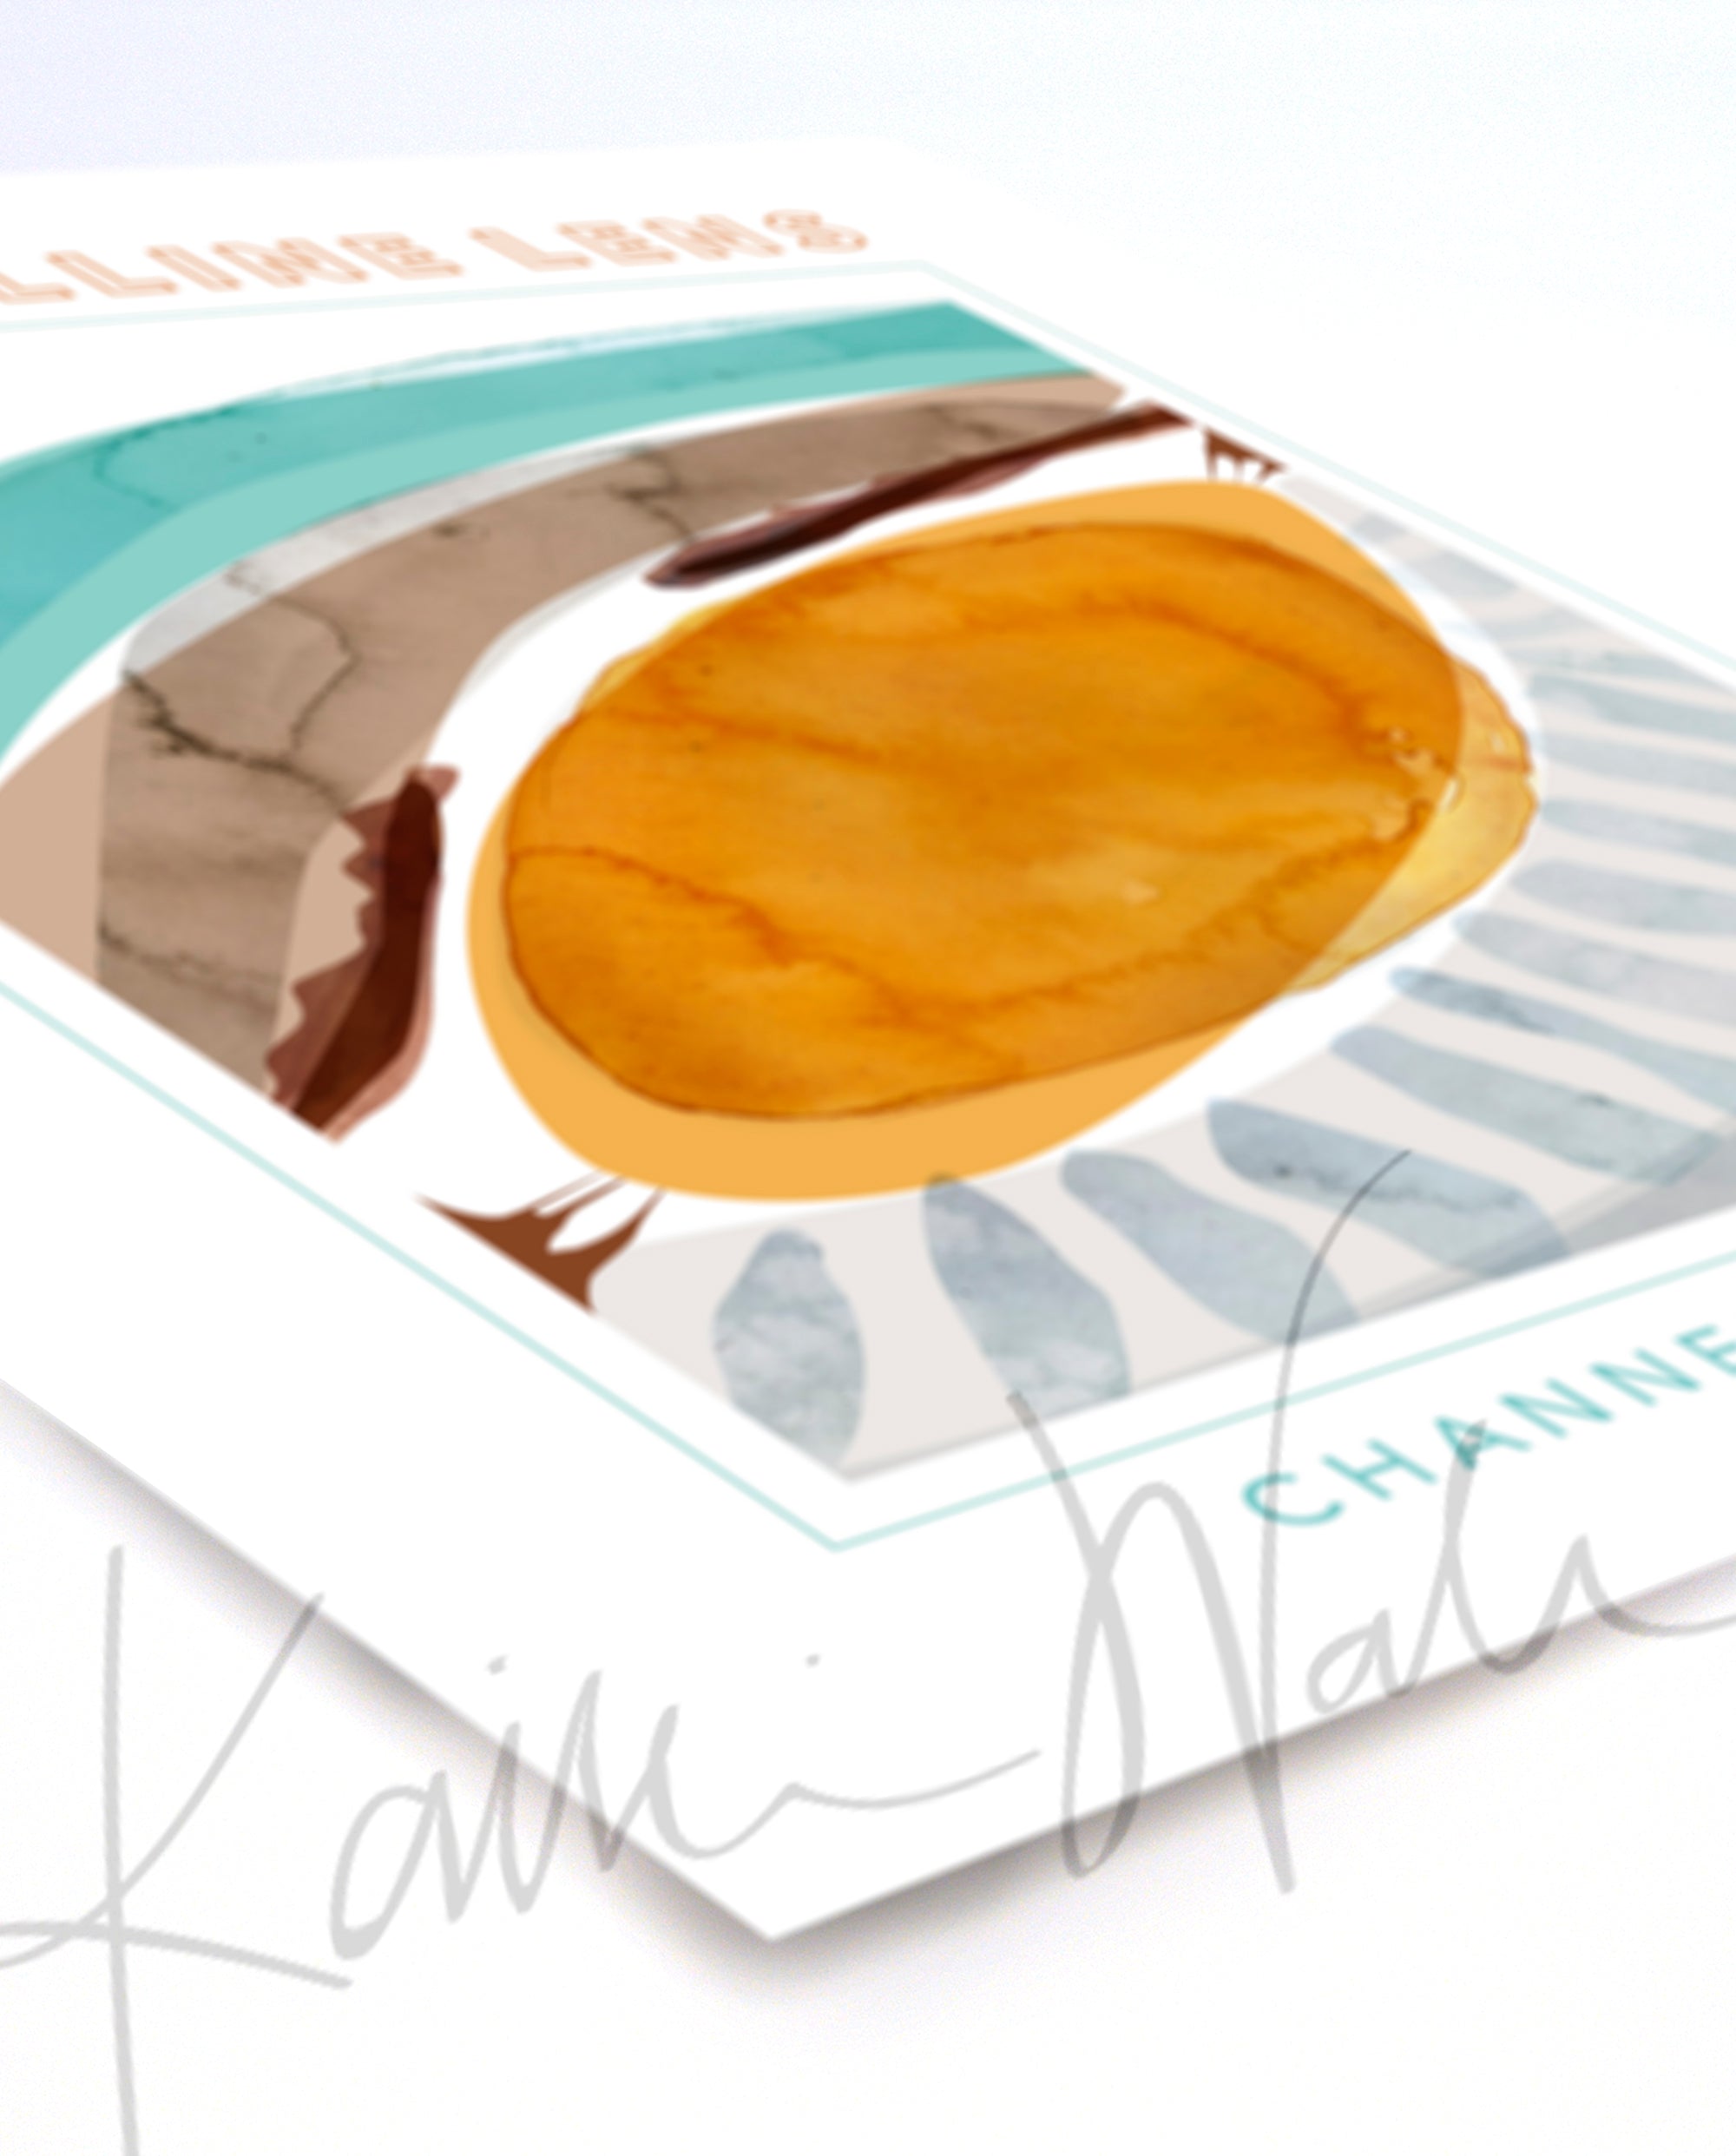 View of a contemporary poster design of the lens in teal, brown, orange, and gray of the lens in teal, brown, orange, and gray. The painting is at an angle.